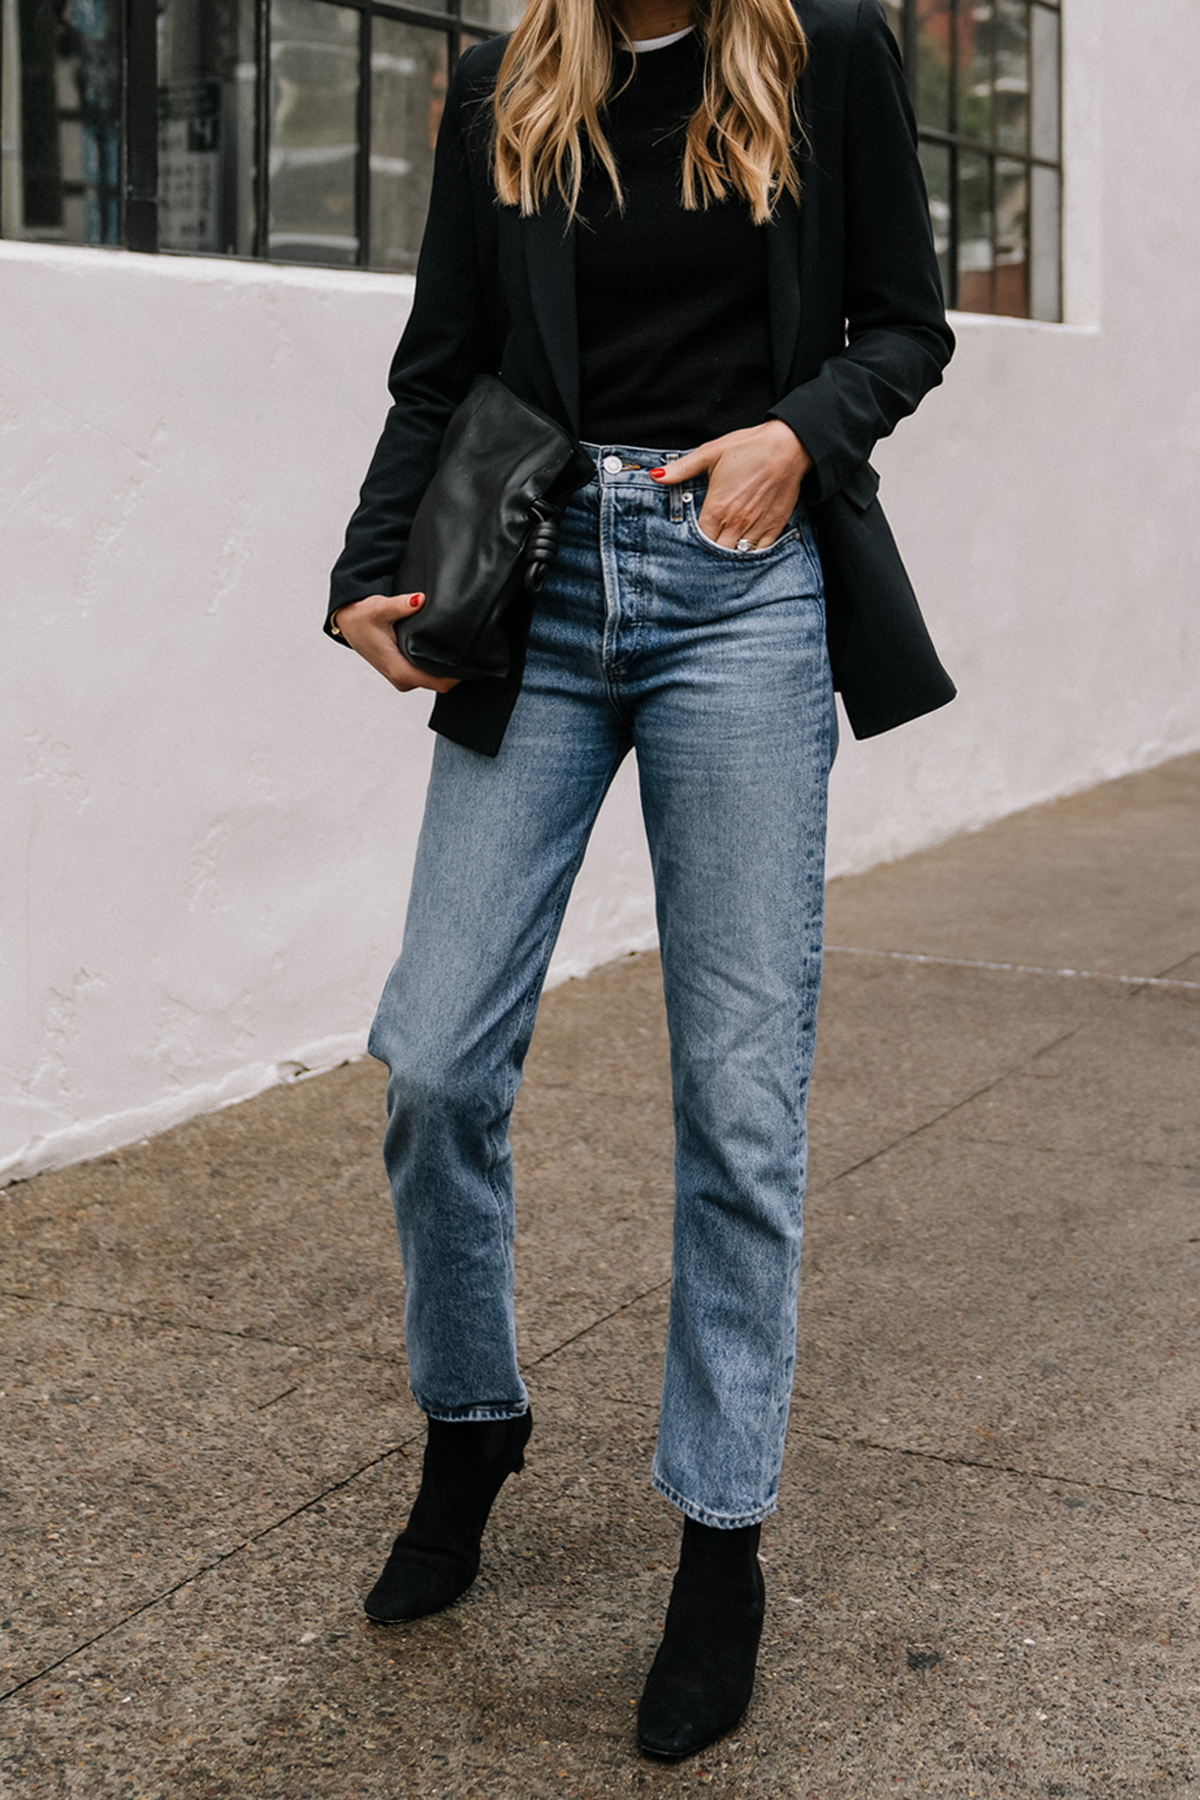 Outfit Ideas with Jeans for Business Casual Days - Fashion Jackson